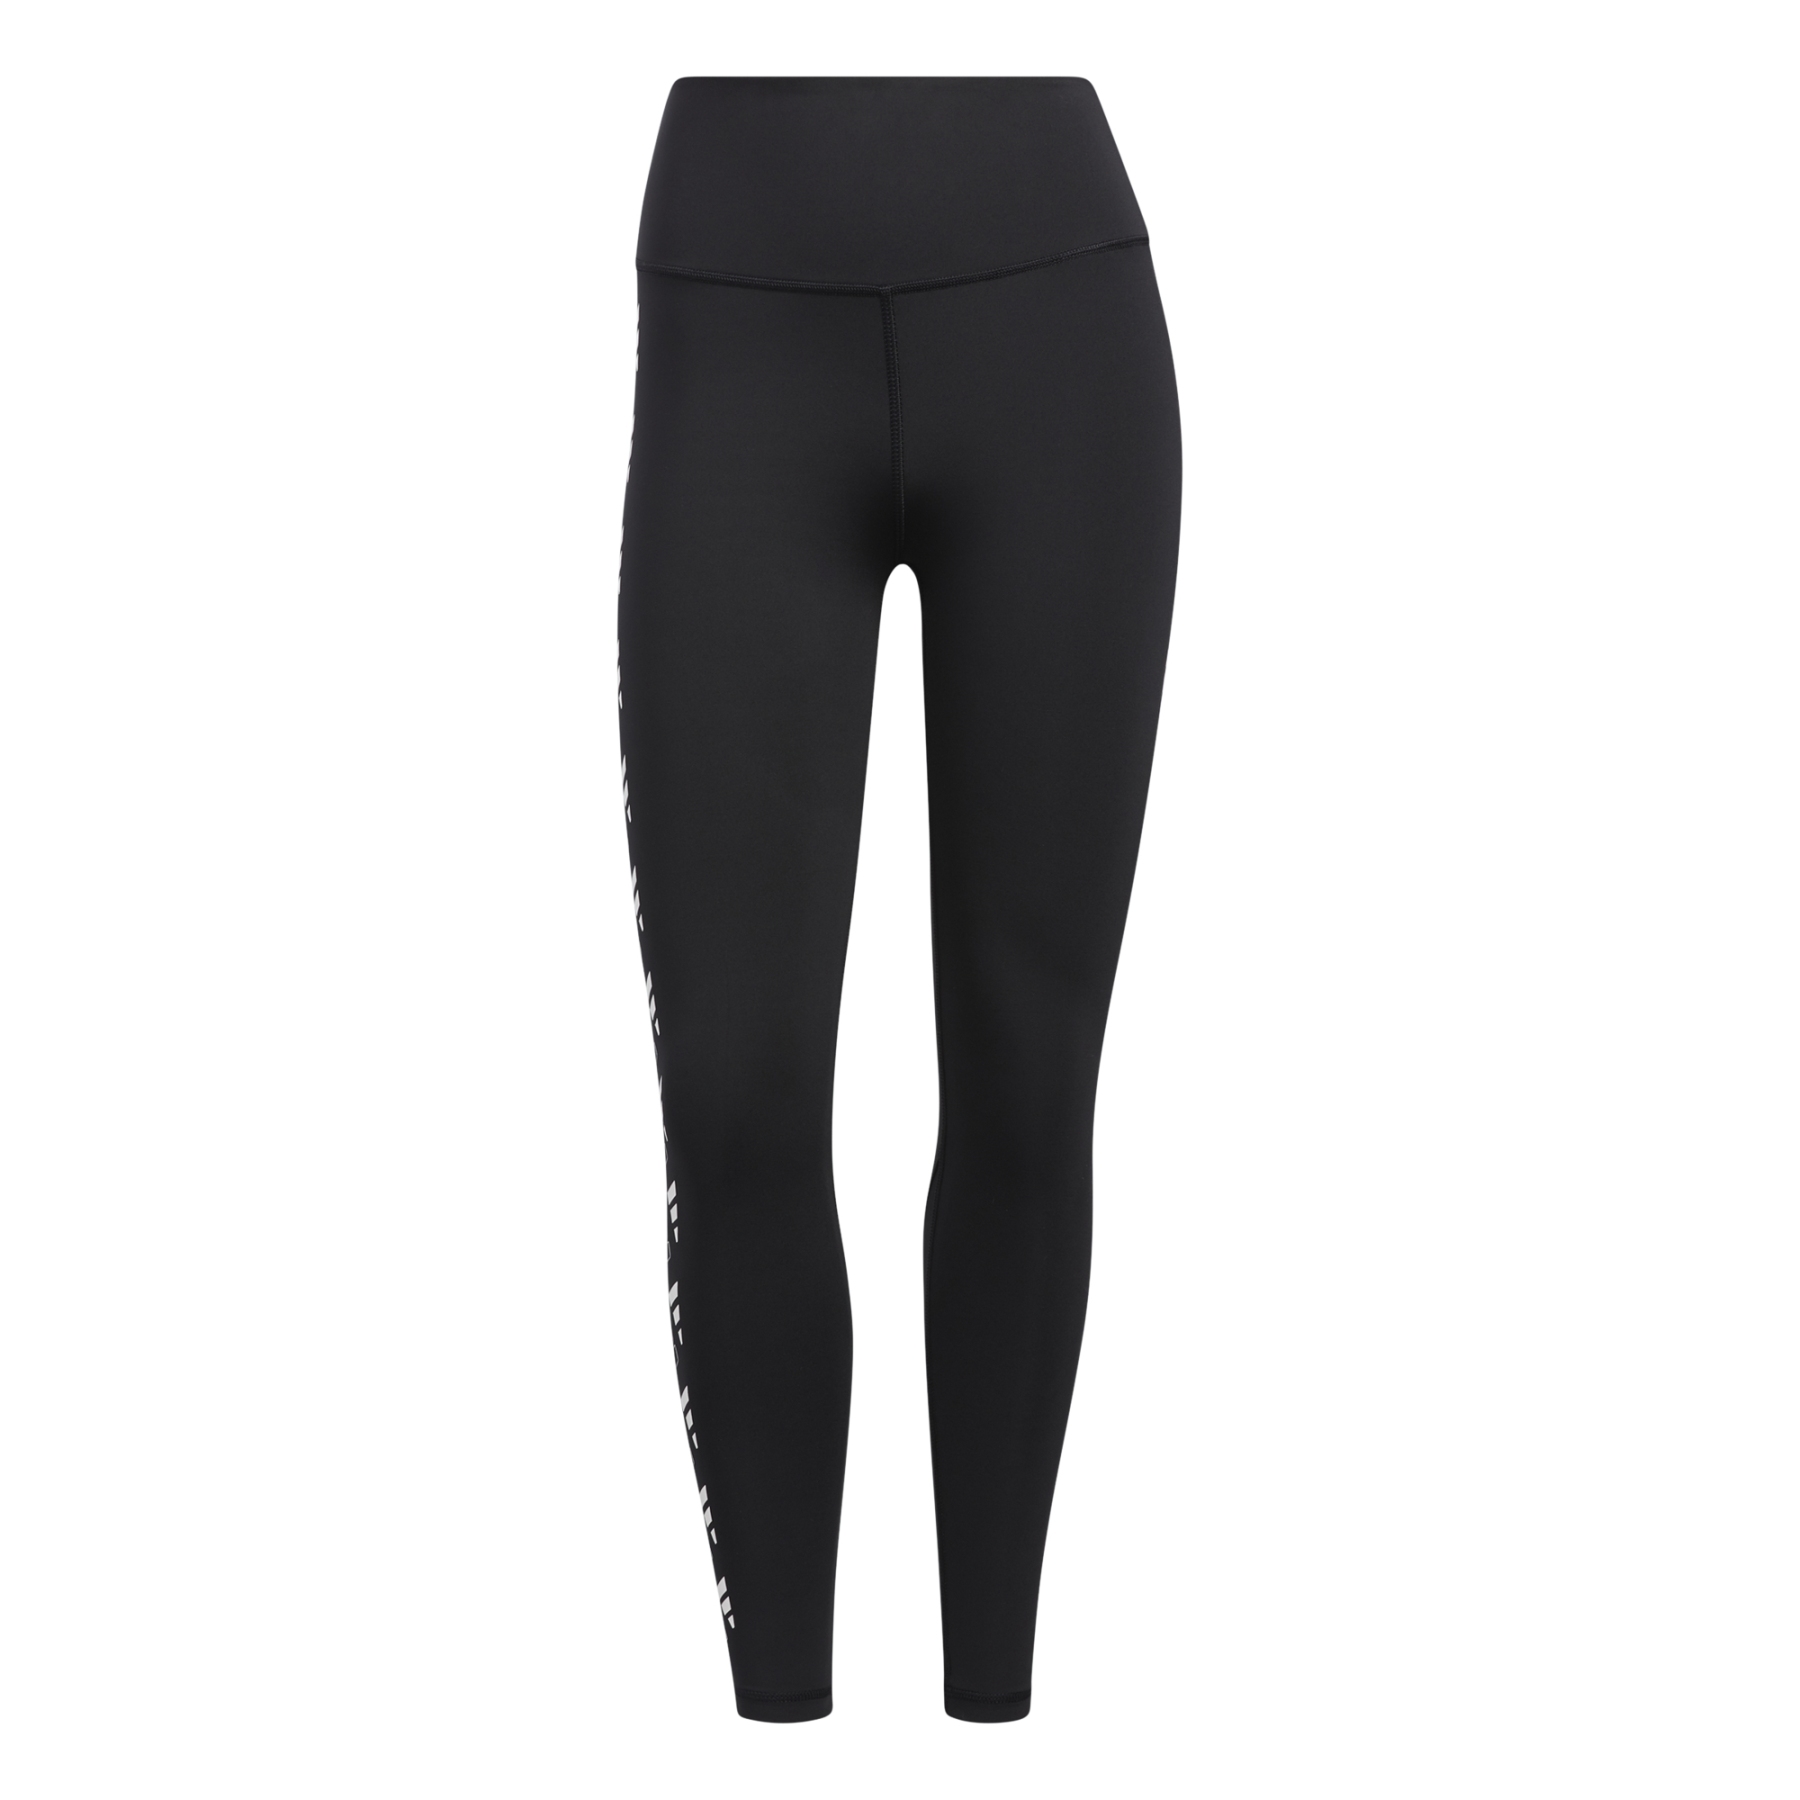 Picture of adidas Optime 3-Bar Training 7/8 Tights Women - black H64191